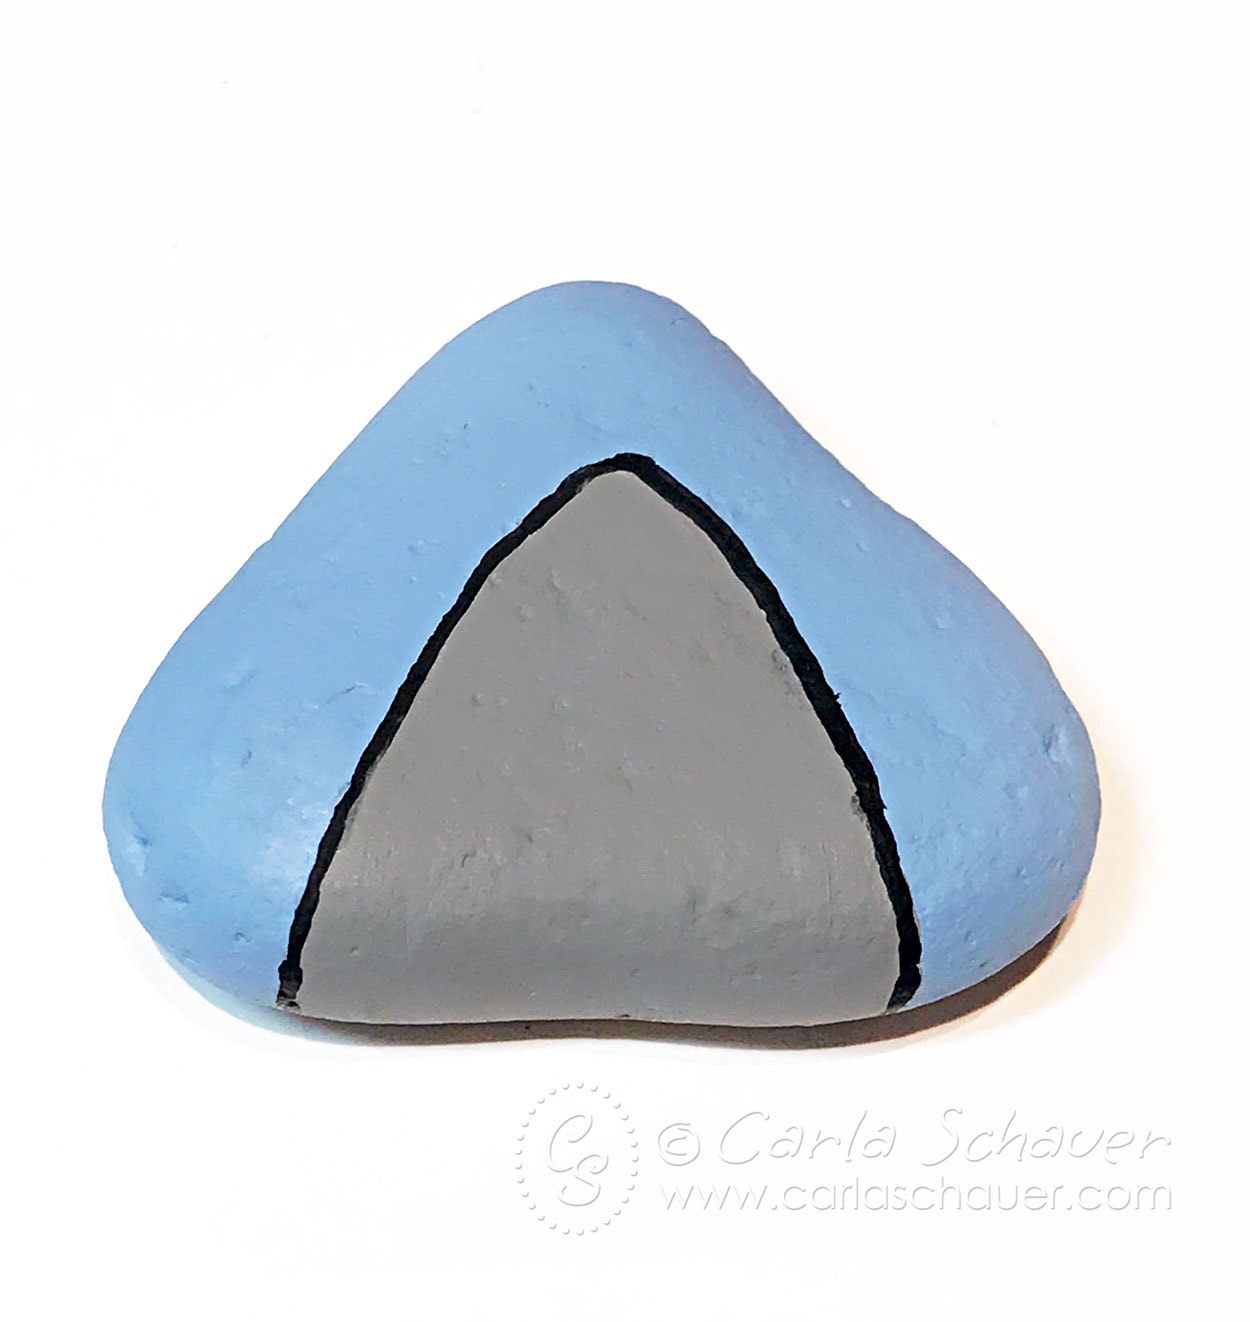 Gray pointed oval painted on blue stone.